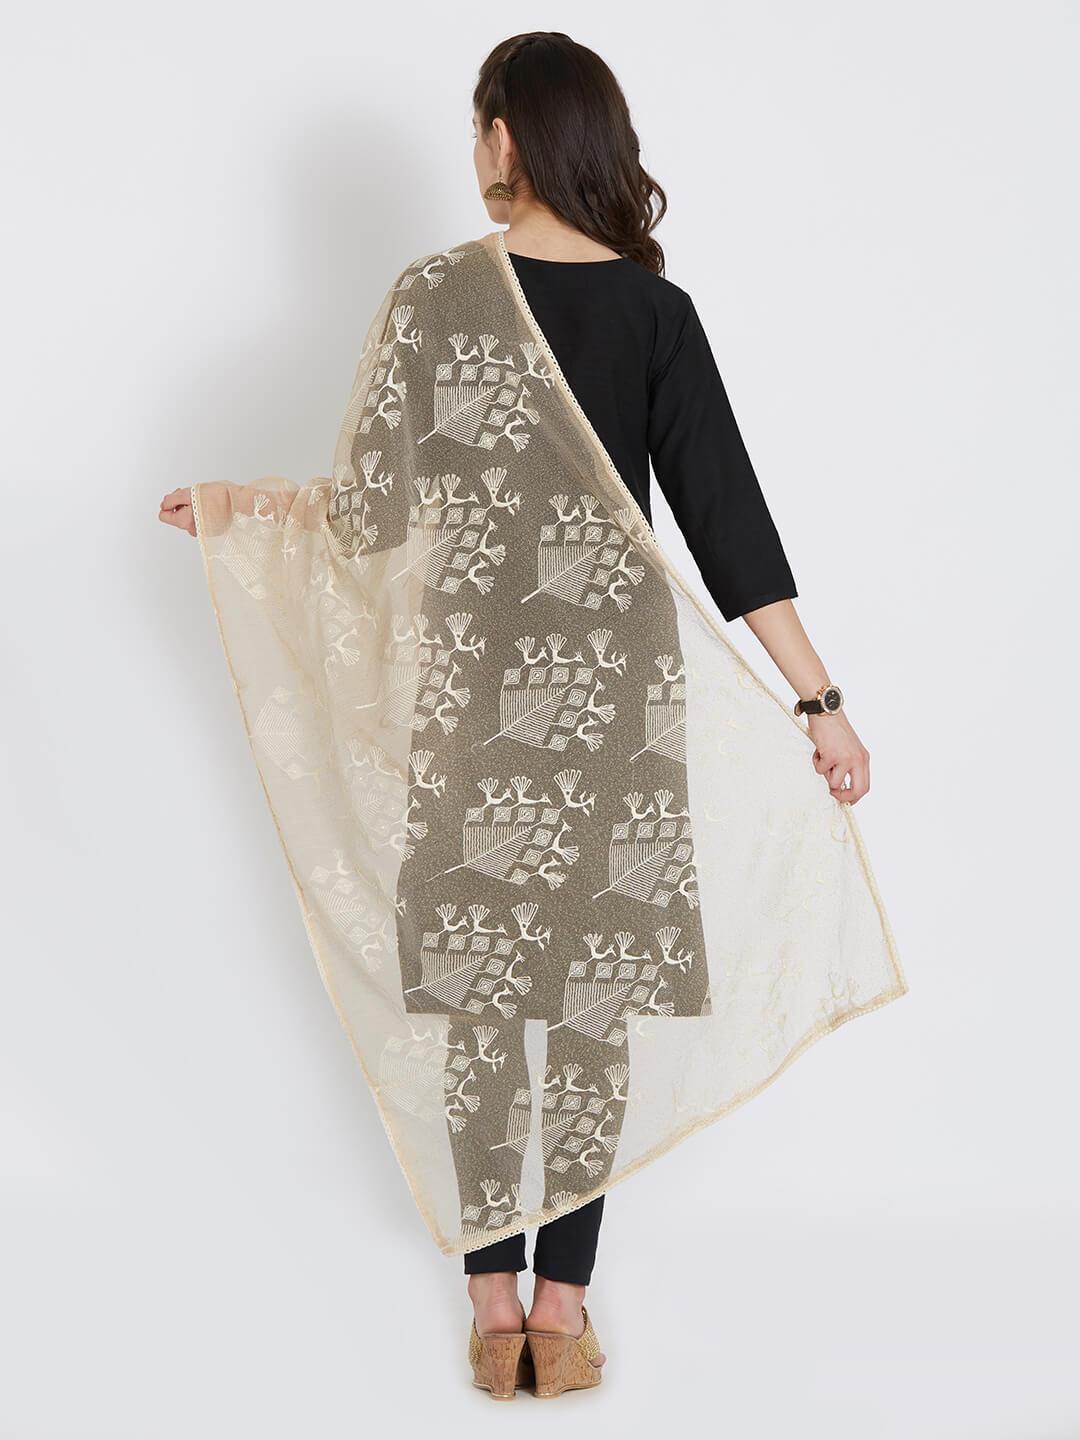 CraftsCollection.in - Beige Jute Dupatta with Tribal Motifs